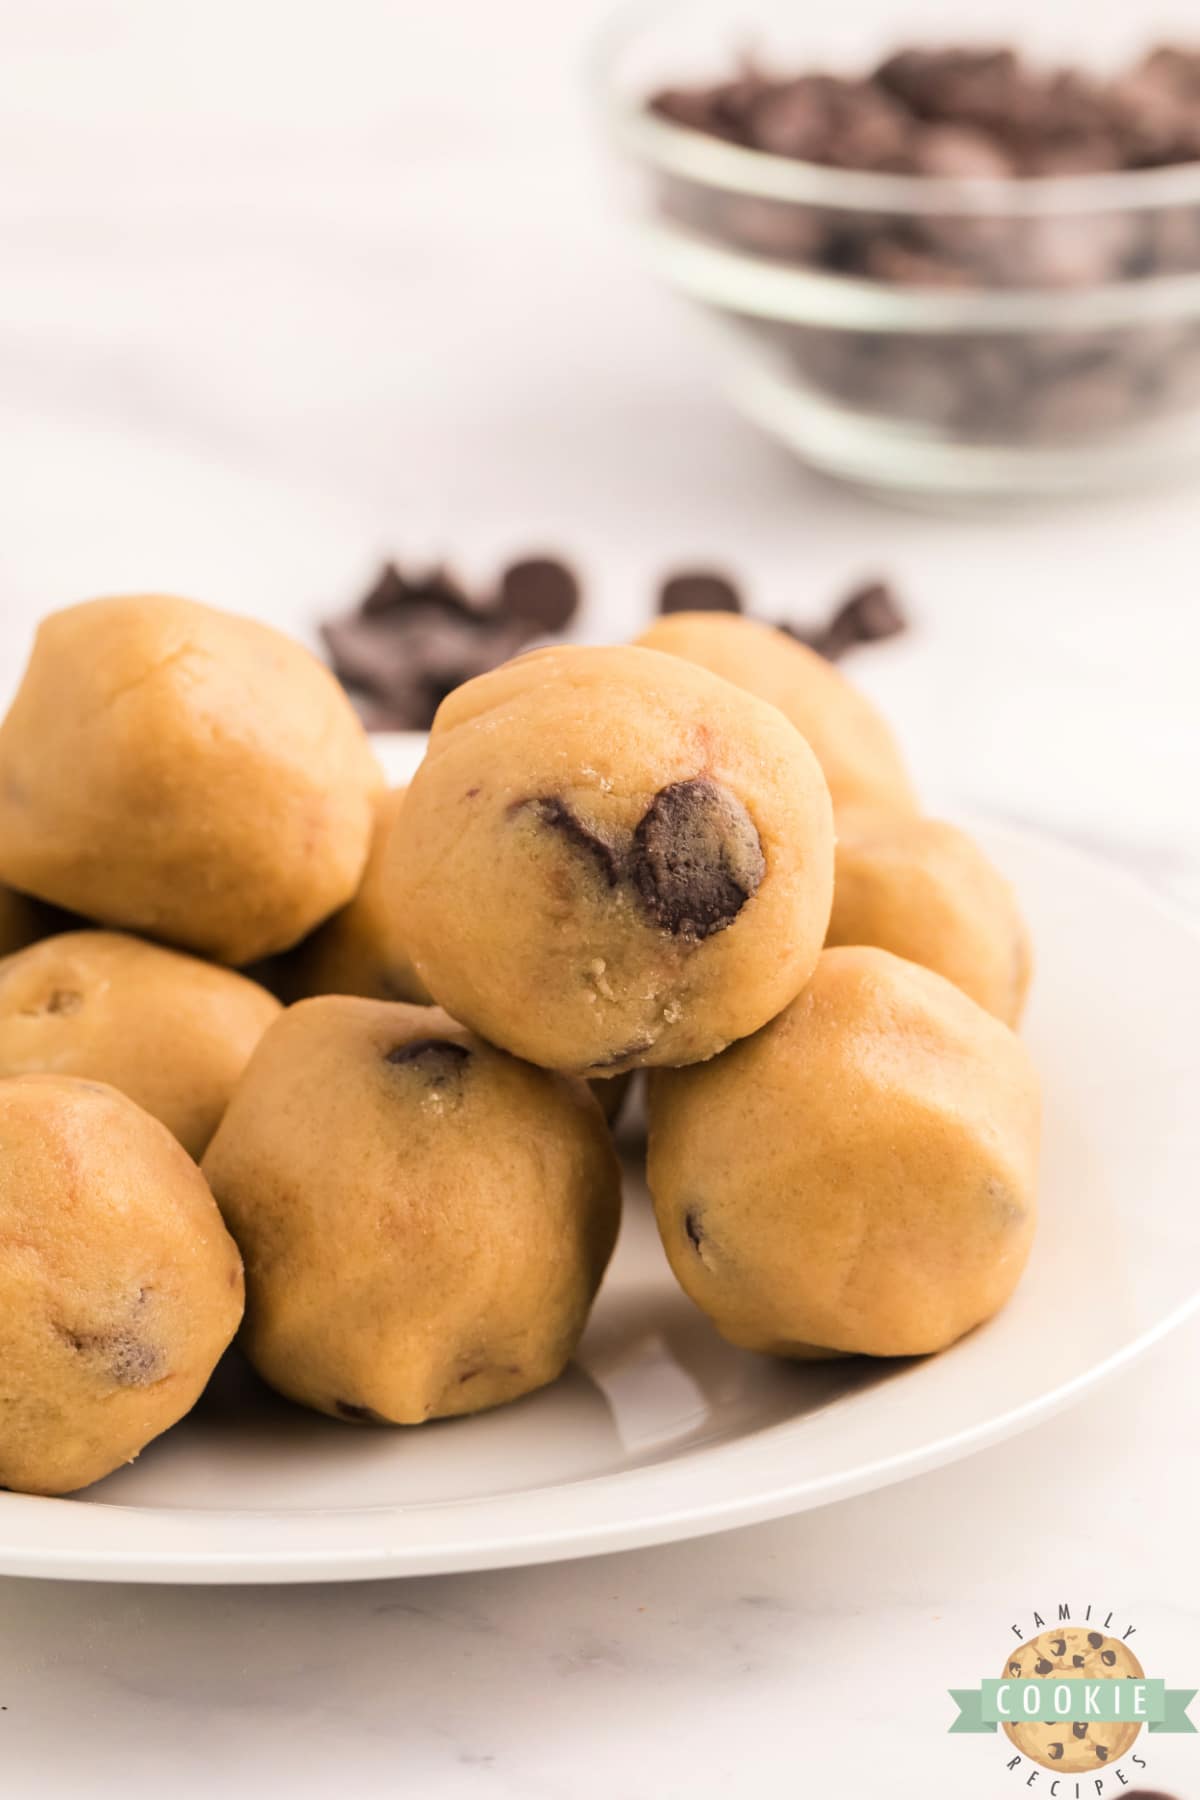 Chocolate Chip Cookie Dough Bites are the ultimate way to enjoy eating raw cookie dough, without worrying about the uncooked egg and flour.  Edible chocolate chip cookie dough that is safe to eat, and perfectly portioned for a quick treat!